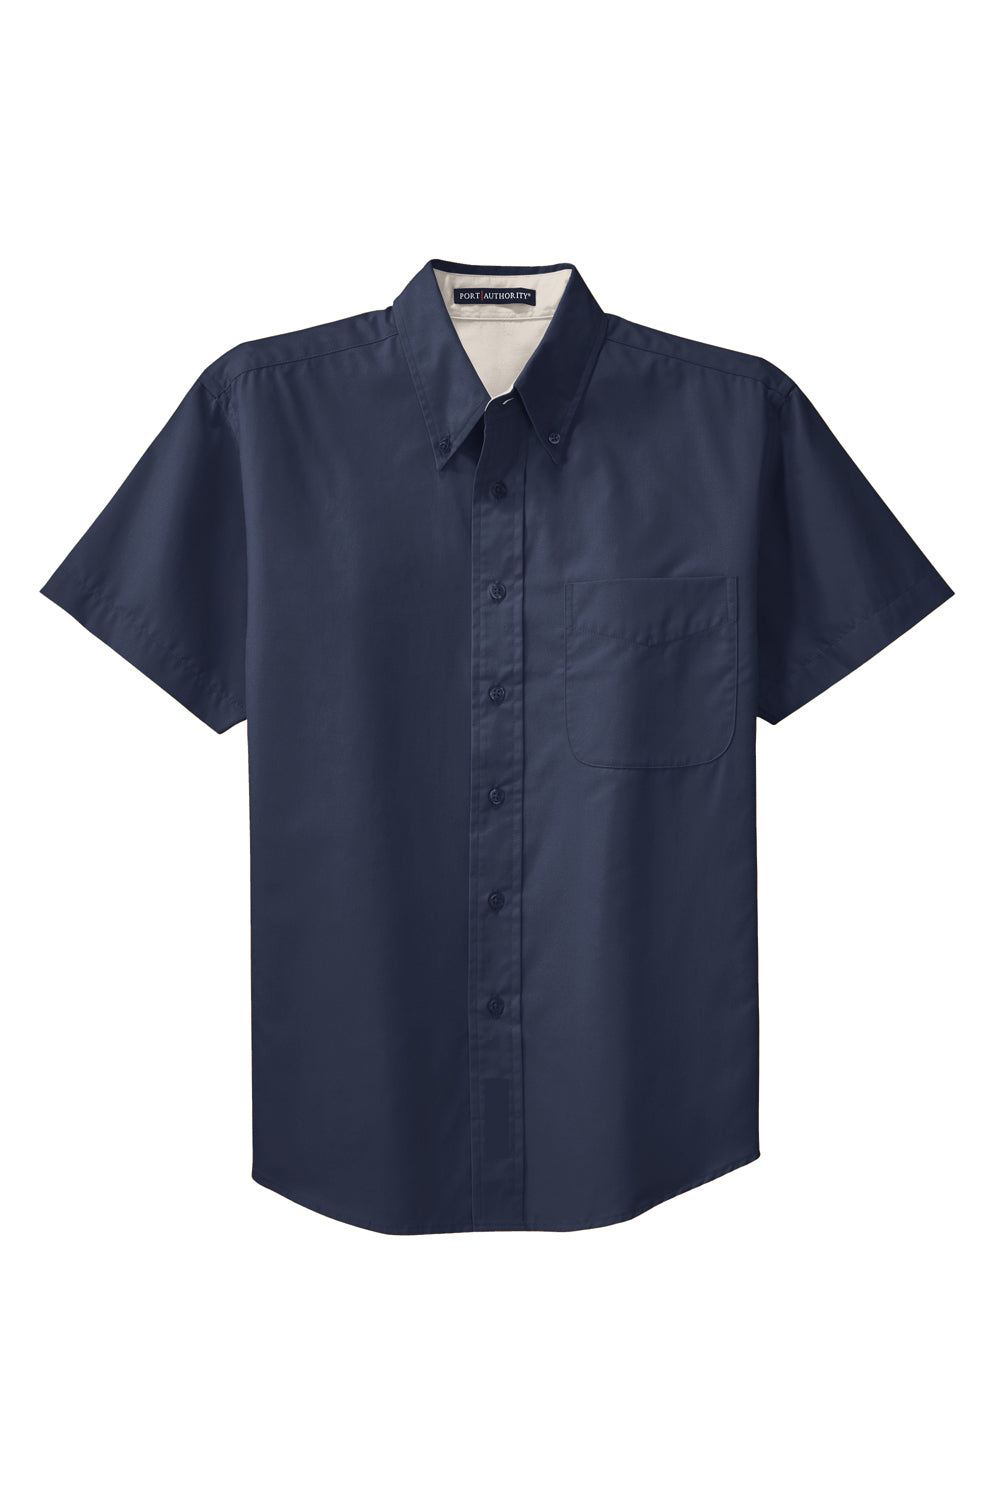 Port Authority S508/TLS508 Mens Navy Blue Easy Care Wrinkle Resistant ...